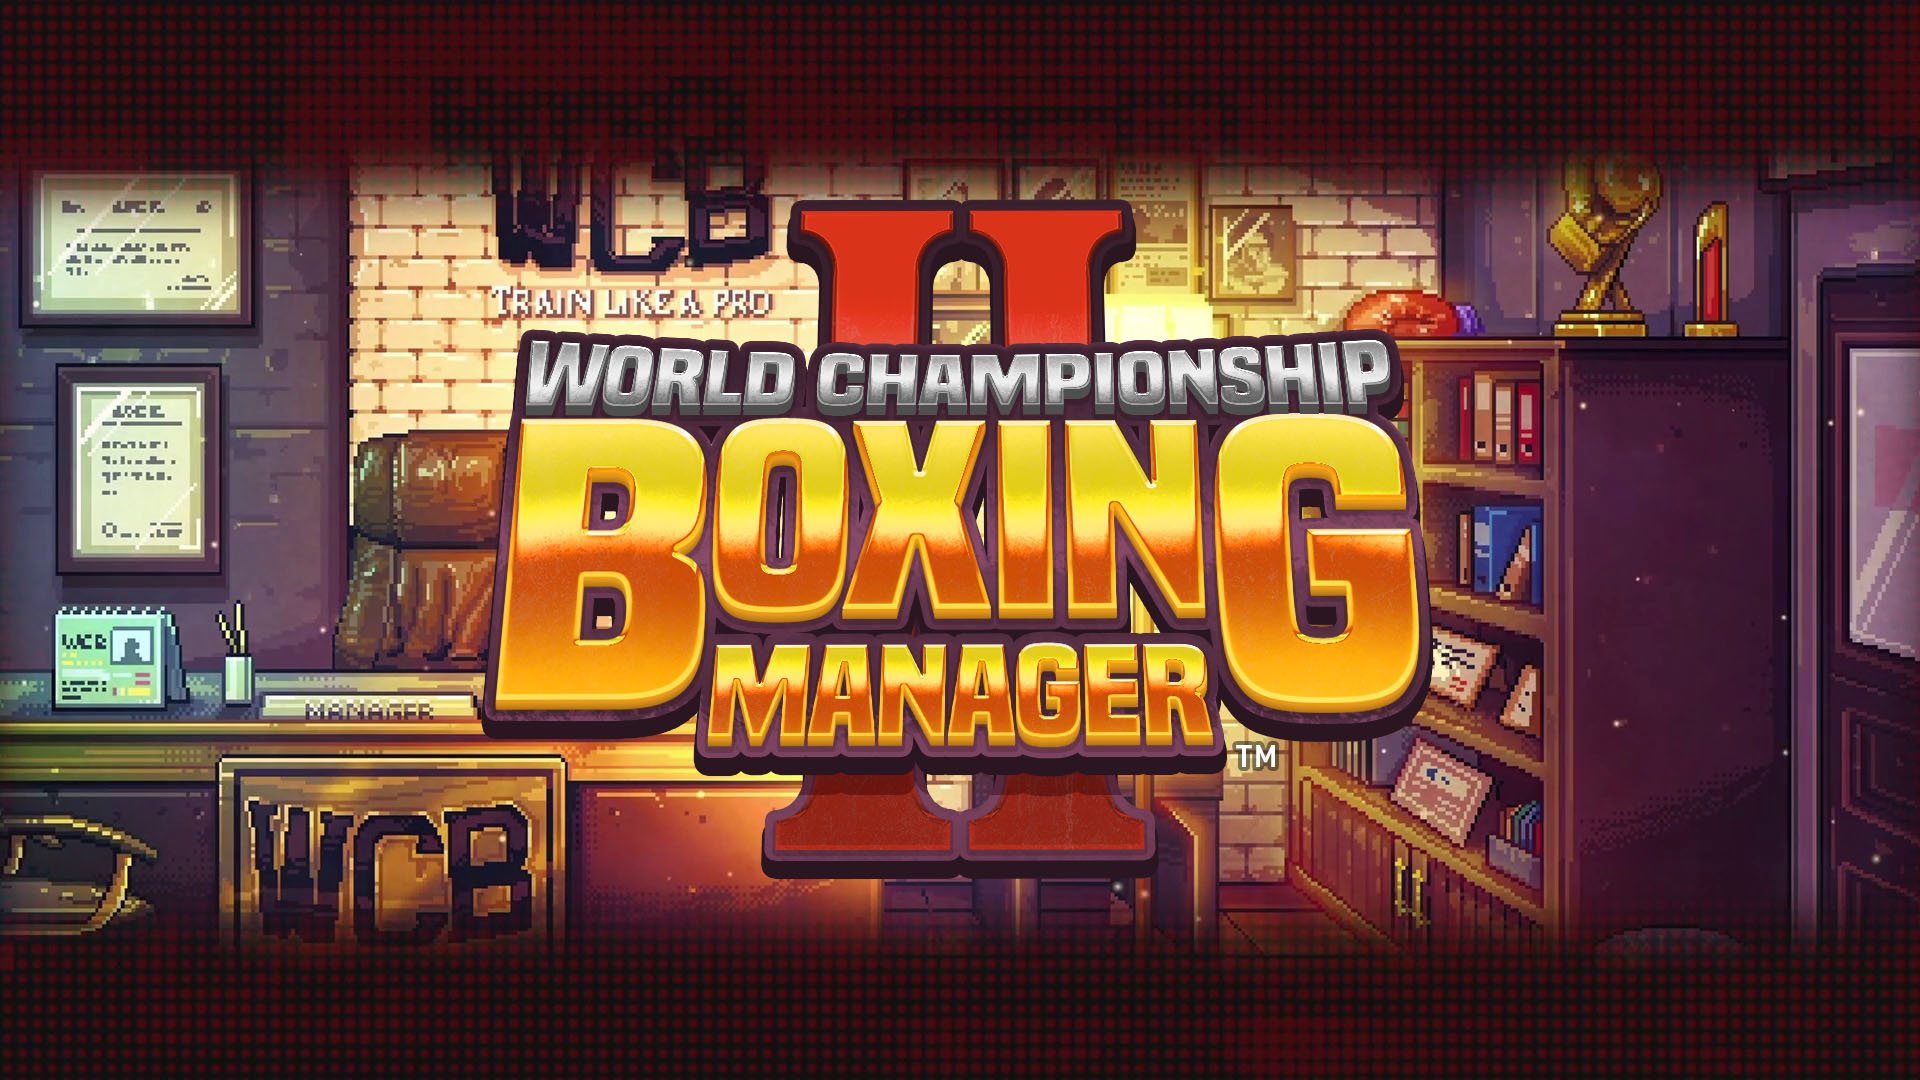 World Championship Boxing Manager II announced for PS4, Xbox One, Switch,  and PC - Gematsu